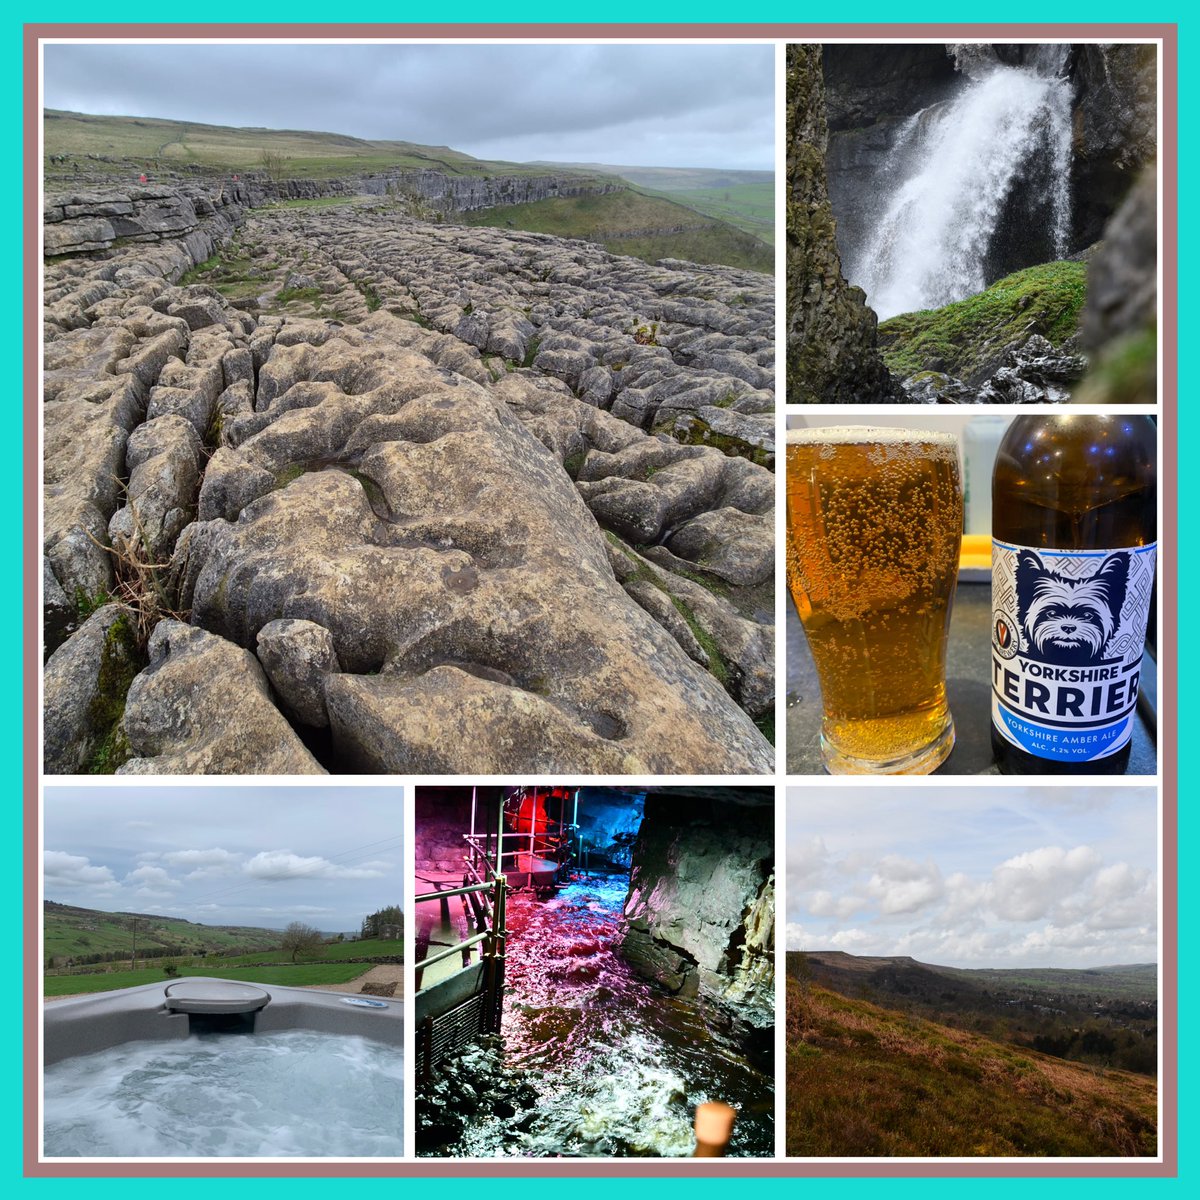 Back to the bright lights and data connection of Greater London. An absolutely gorgeous week in Yorkshire of caves, waterfalls, mountains, long walks, historic villages and towns and a lovely relaxing hot tub. Yorkshire, you were fantastic! #Yorkshire #ILoveYorkshire